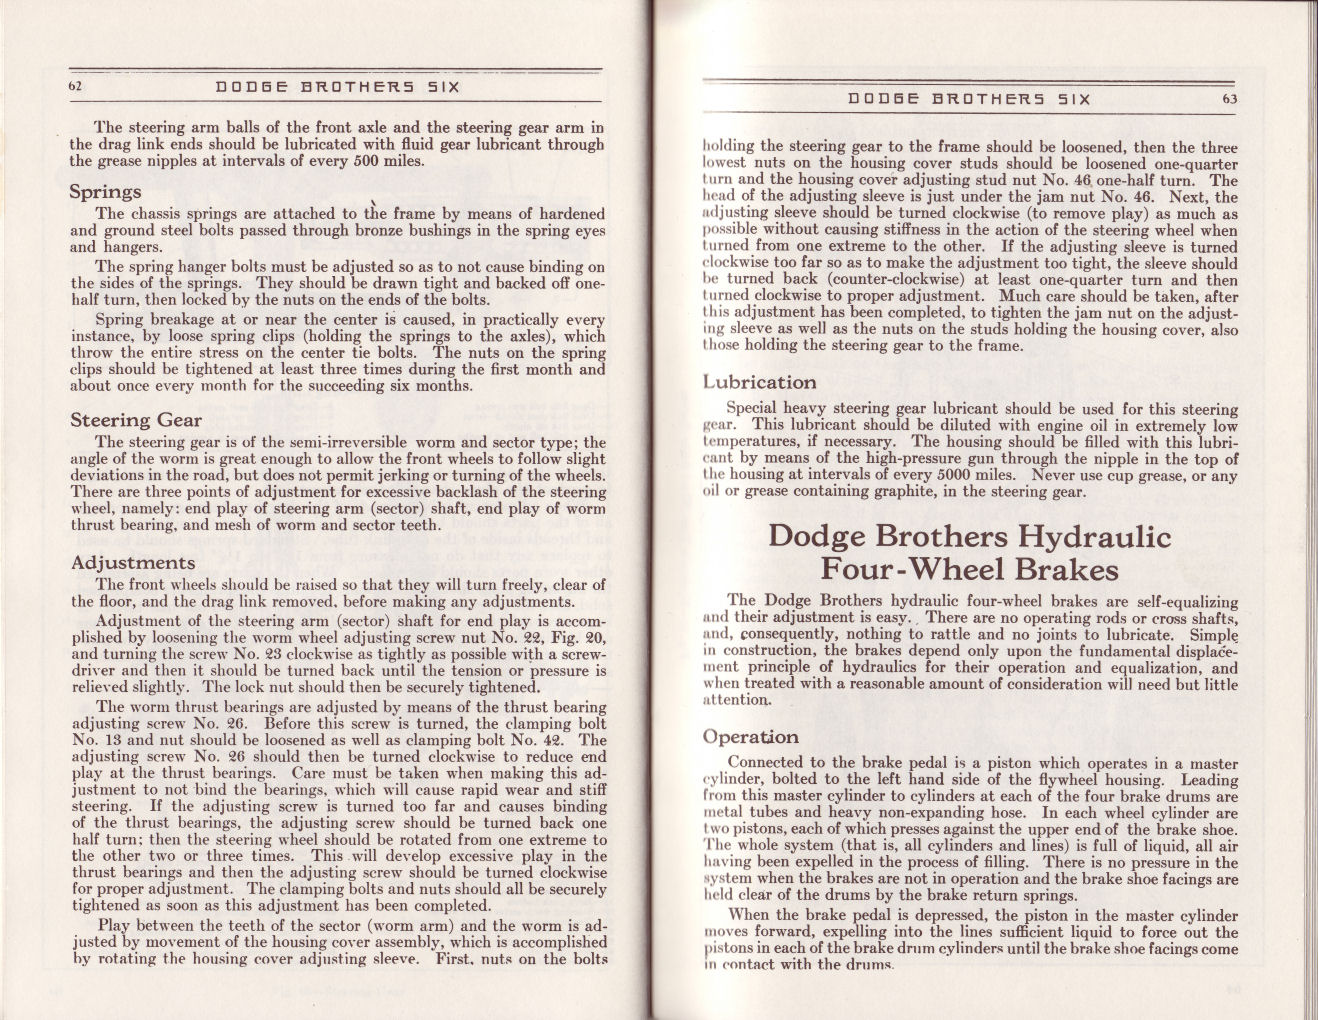 1930 Dodge Six Instruction Book Page 13